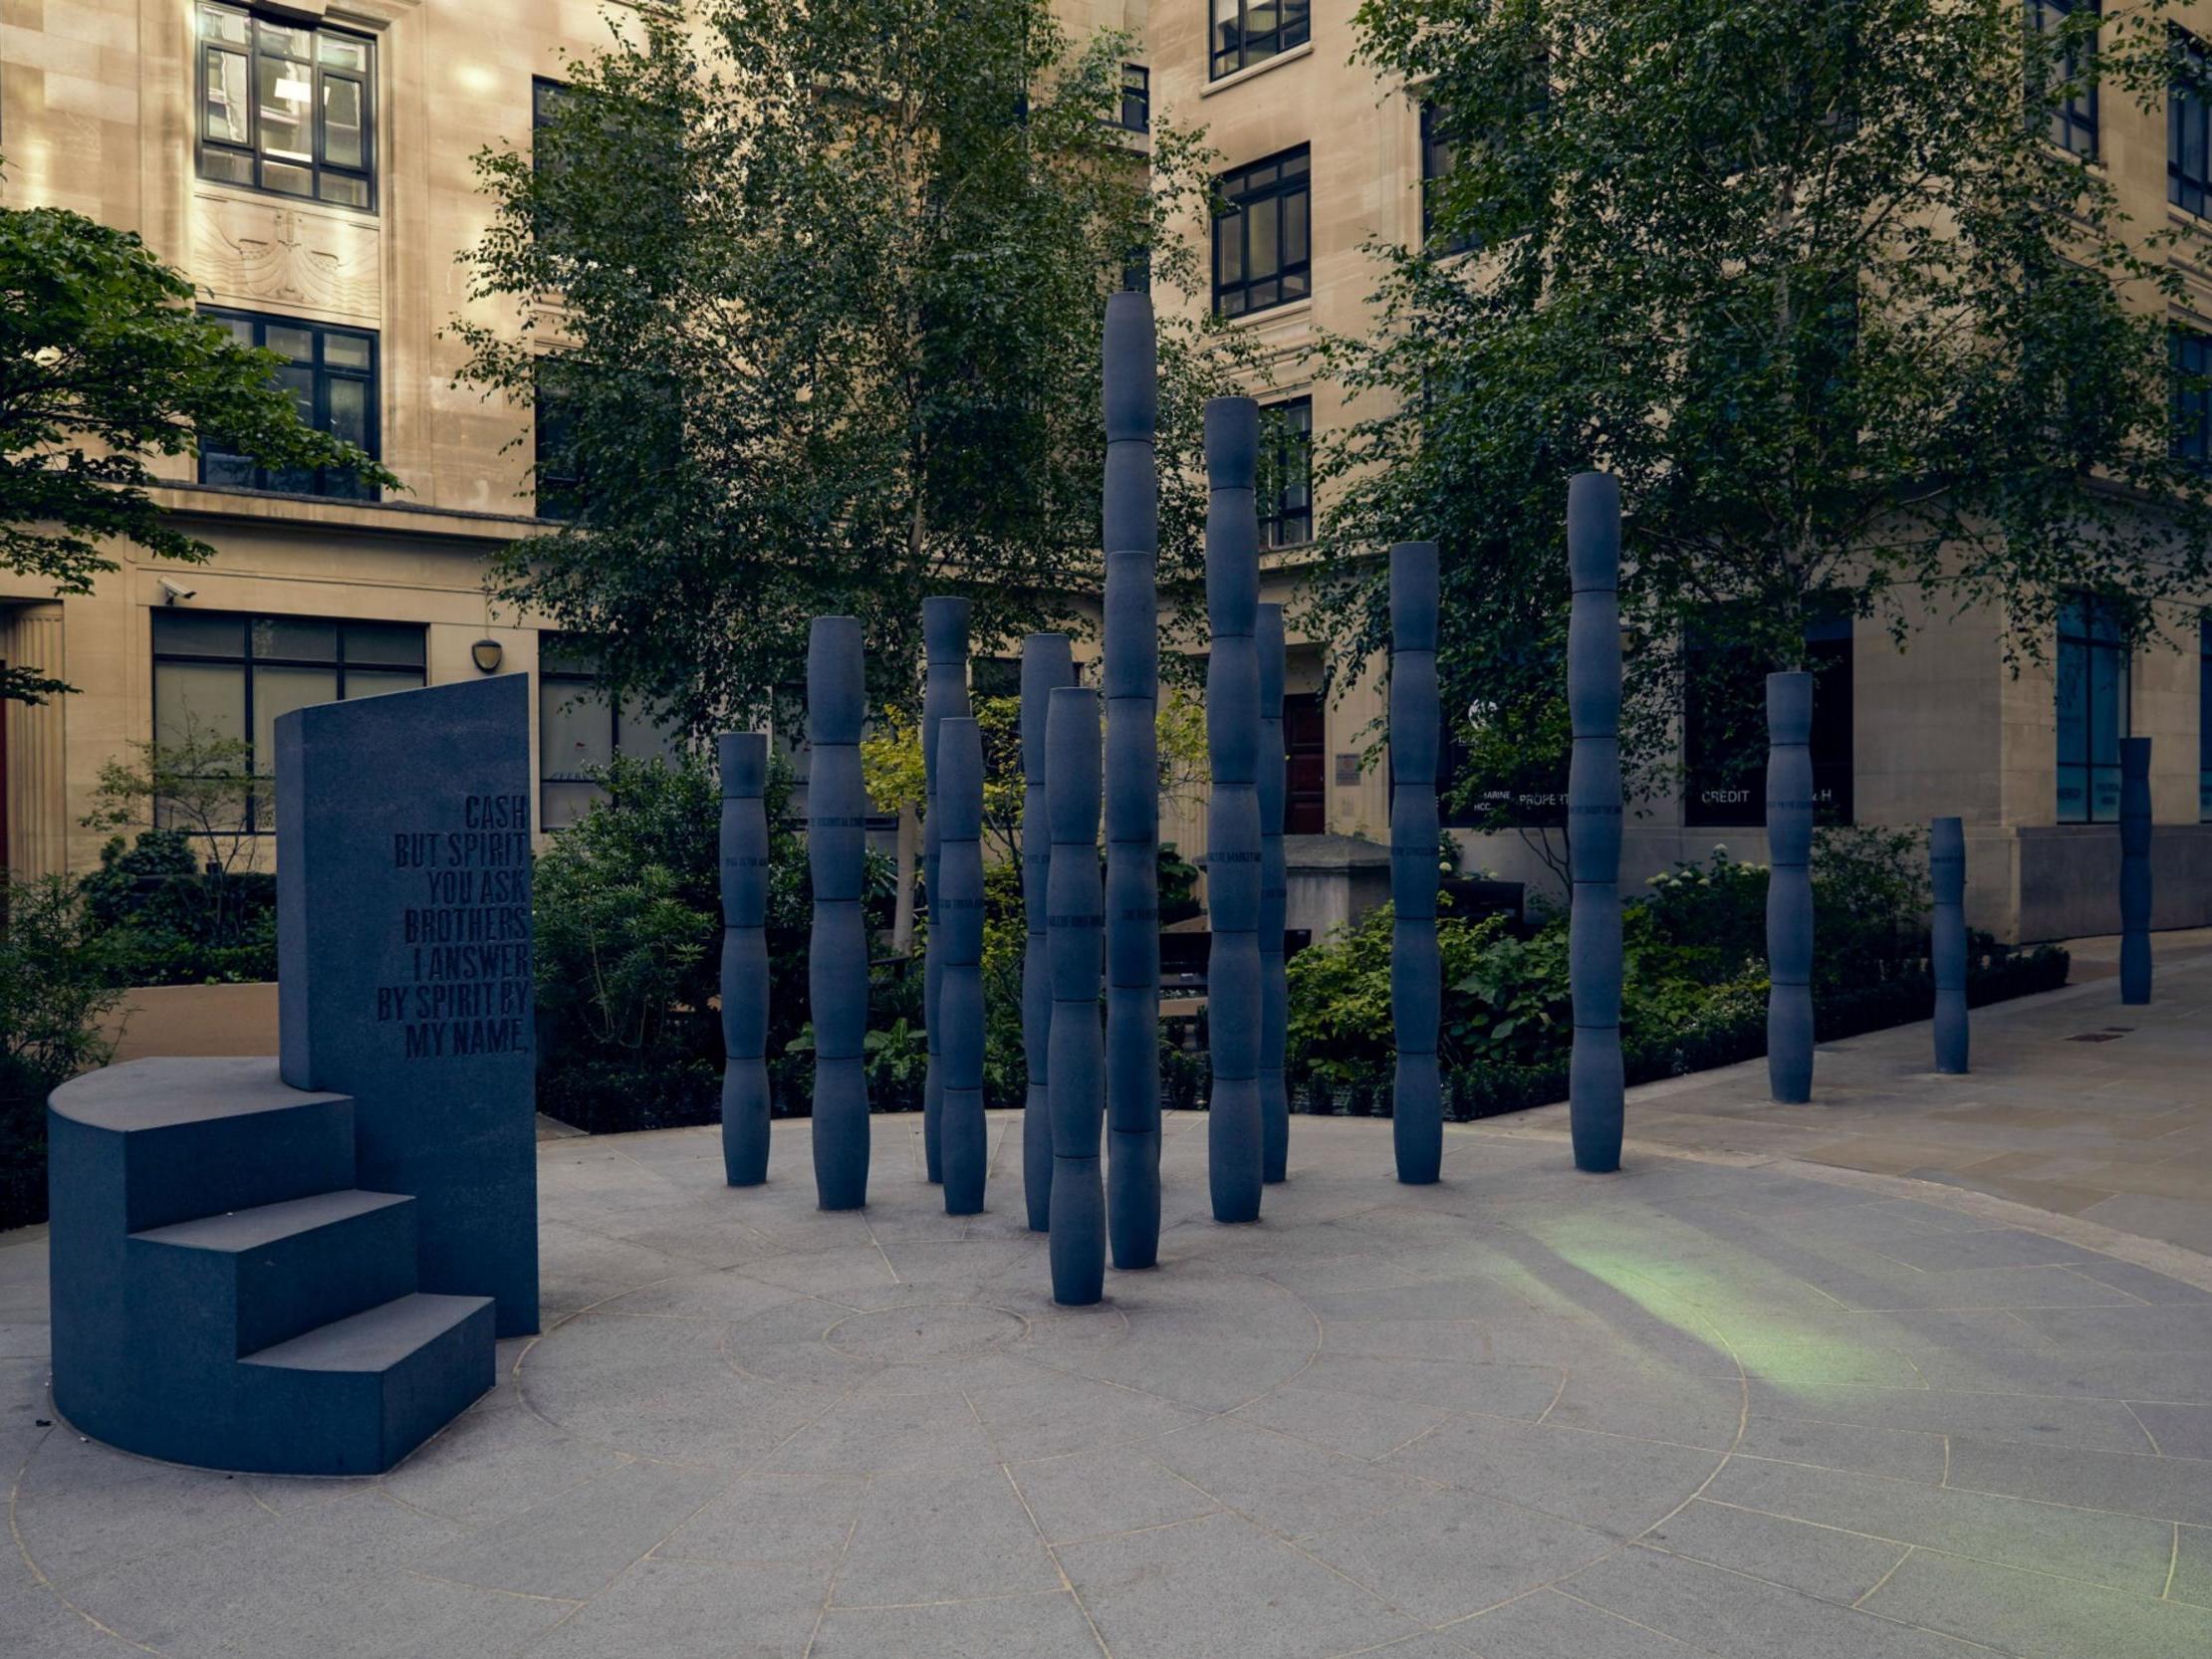 The ‘Gilt of Cain’ monument by Michael Visocchi and Lemn Sissay, commemorating the abolition of the transatlantic slave trade, stands in the City of London